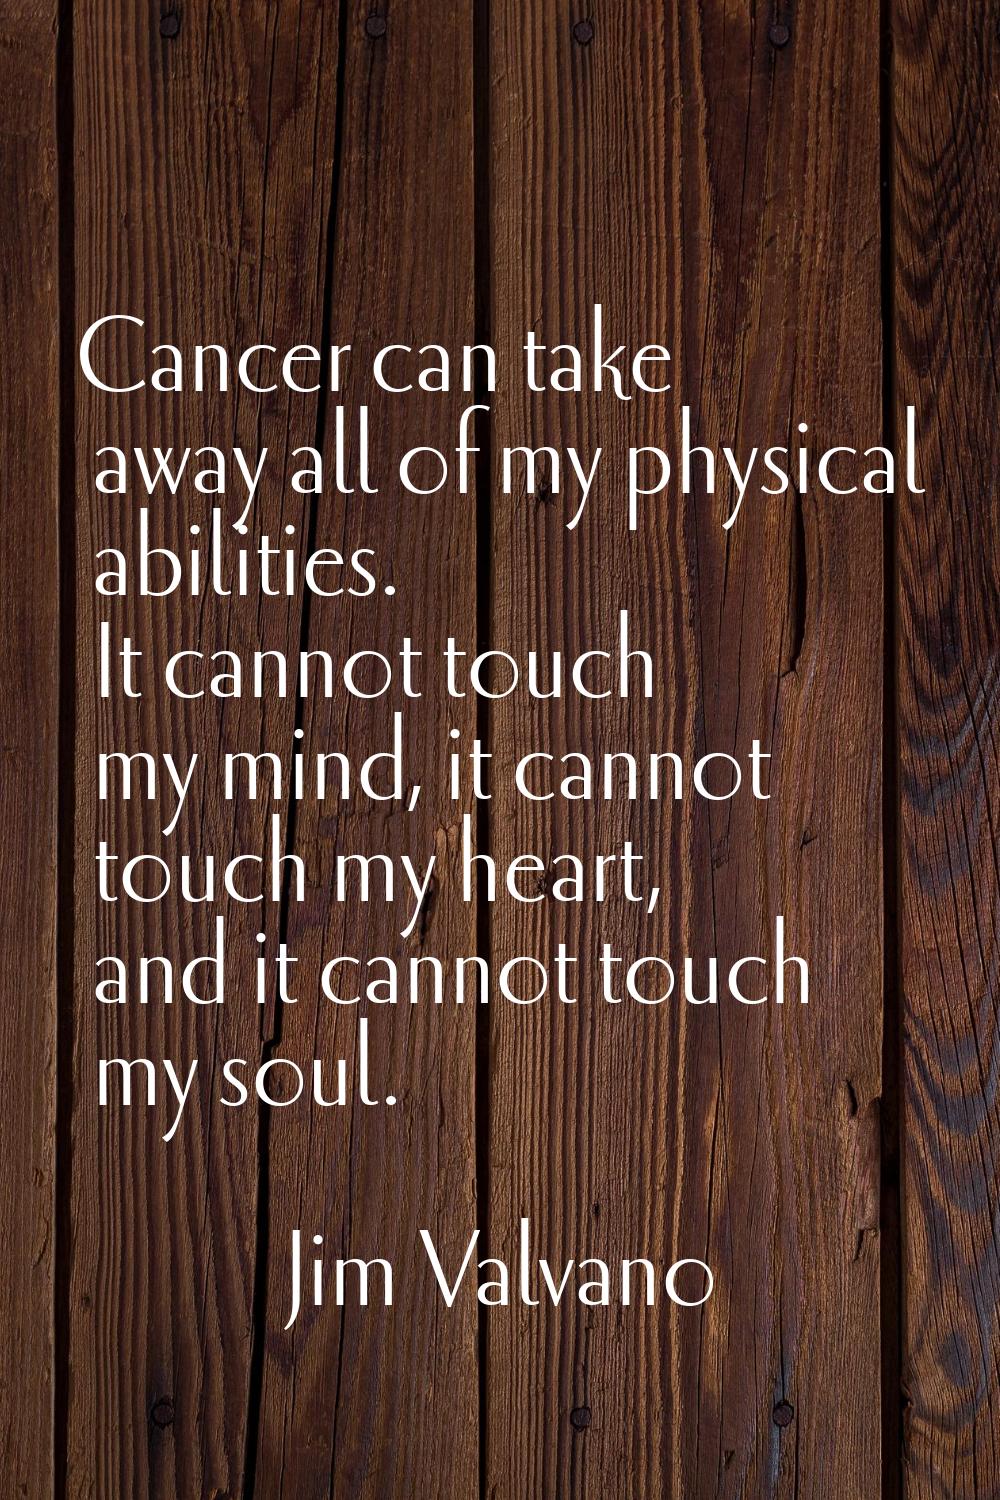 Cancer can take away all of my physical abilities. It cannot touch my mind, it cannot touch my hear